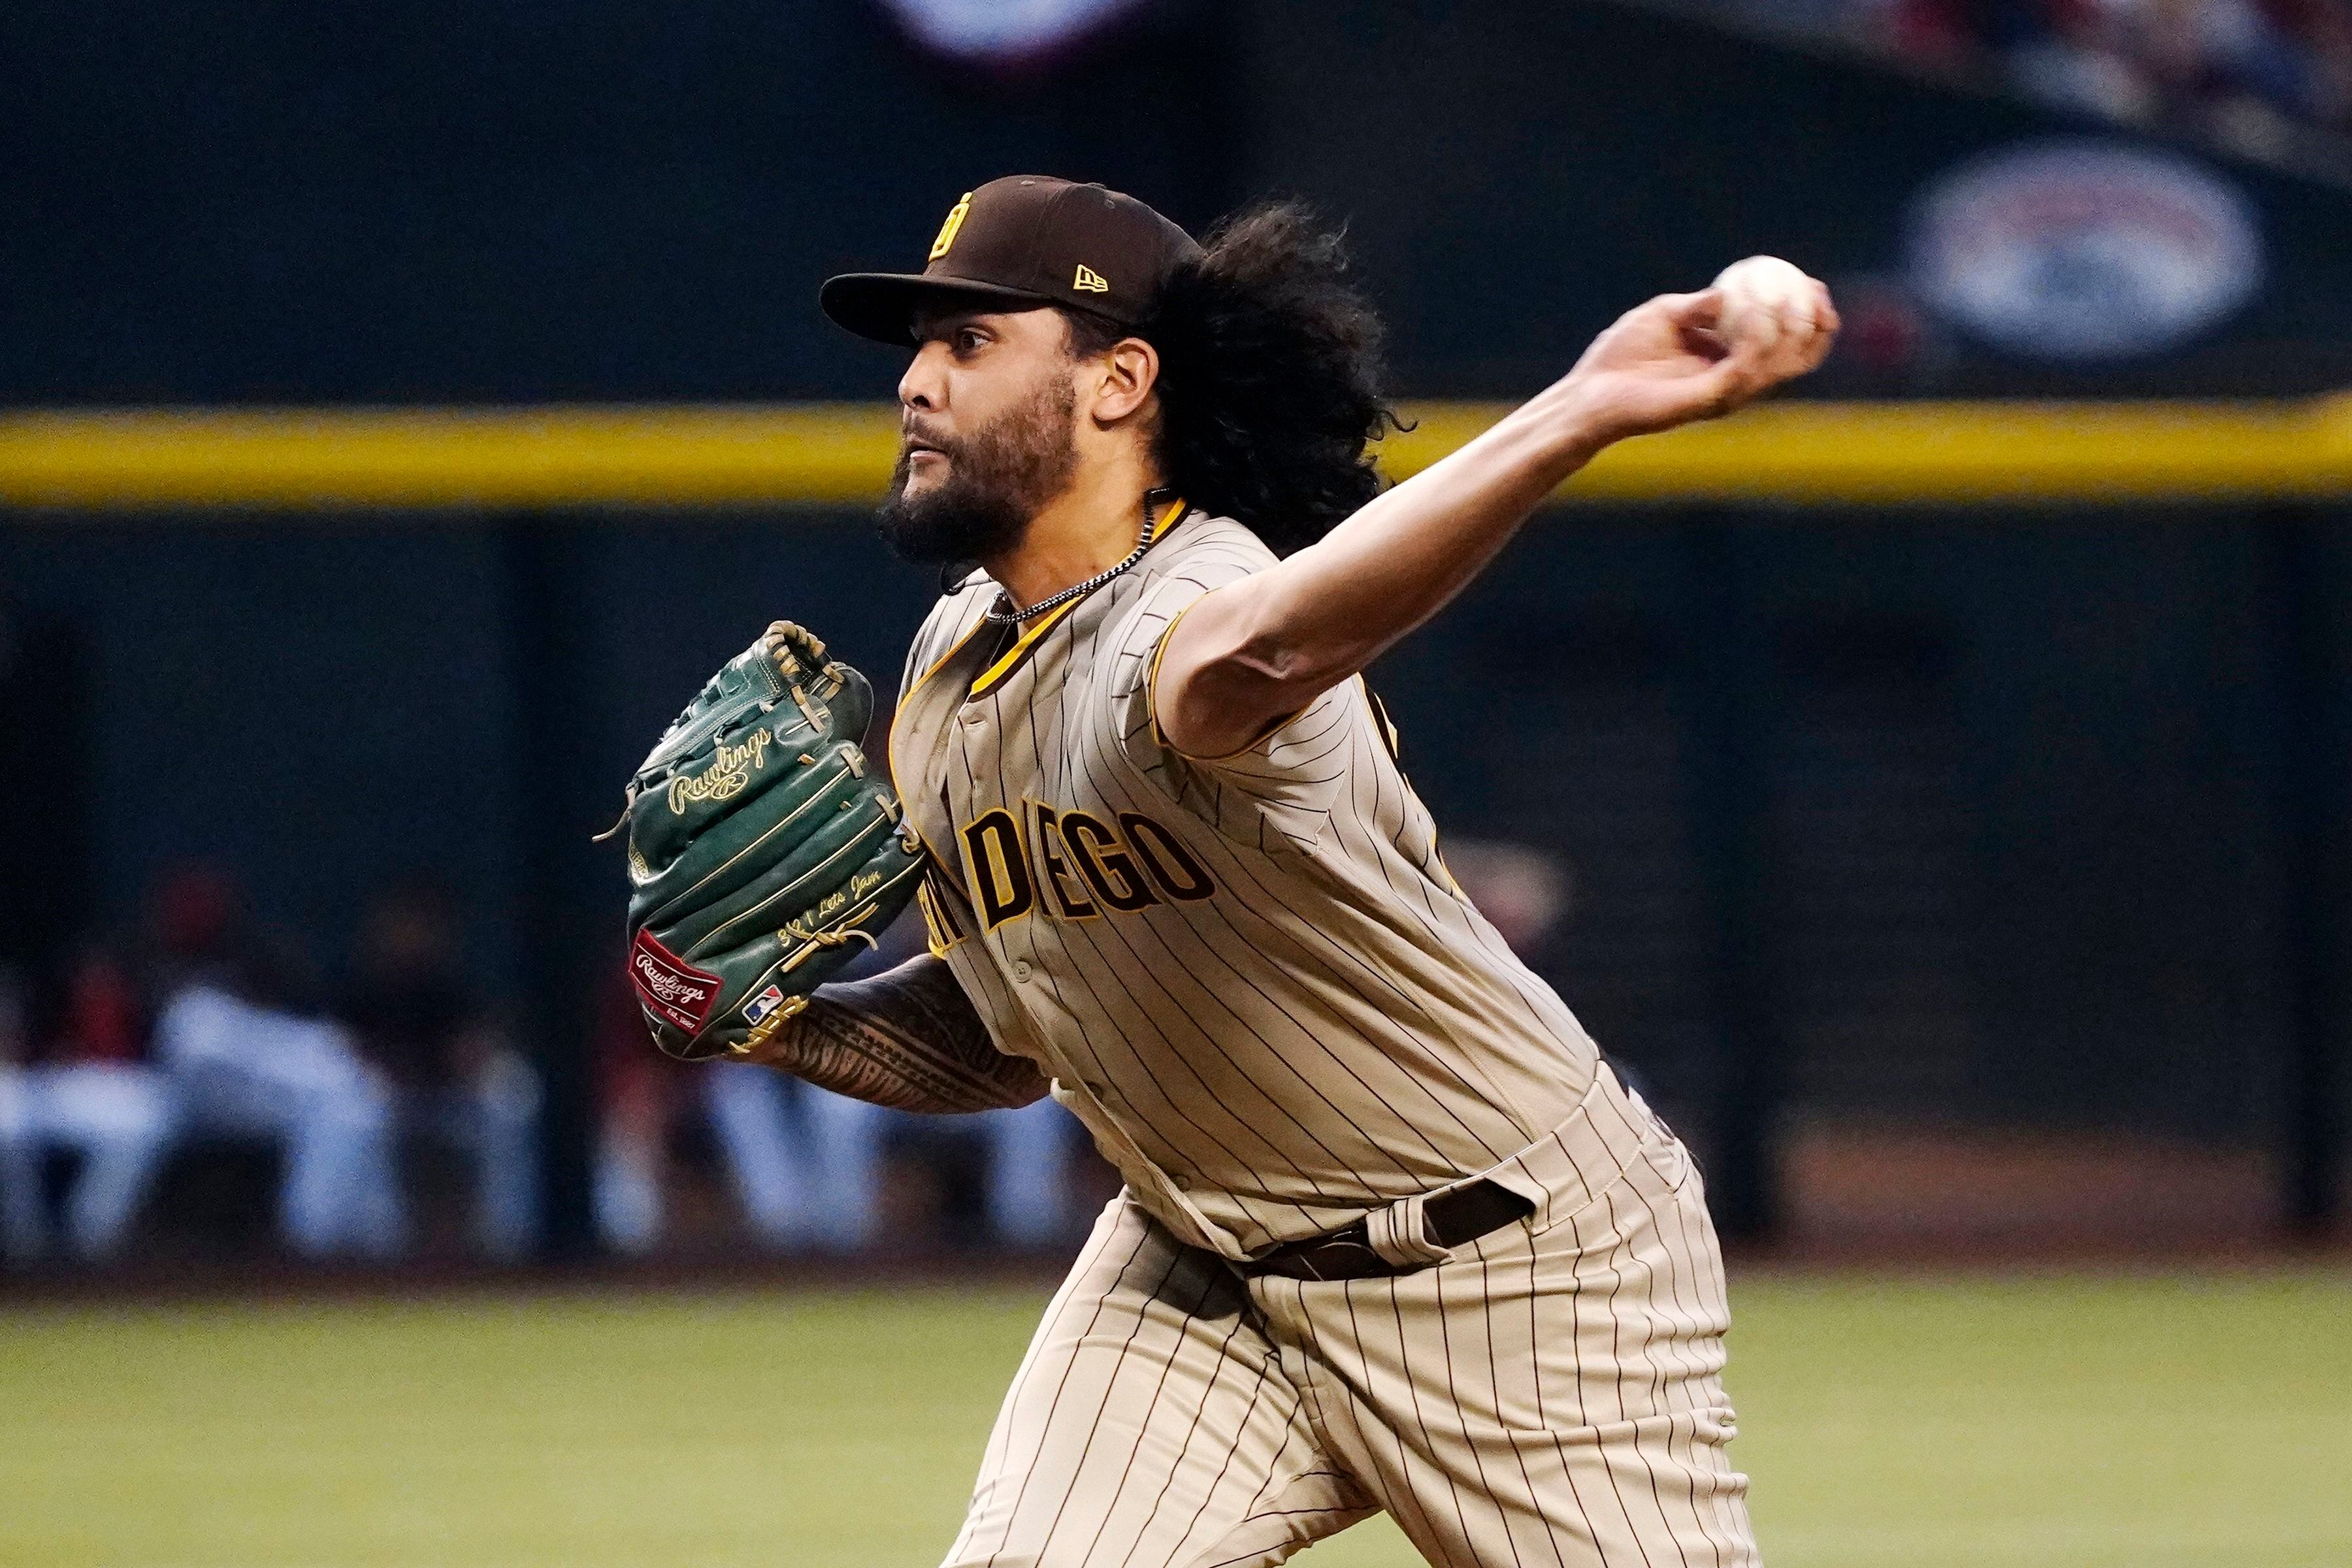 San Diego Padres pitcher hit with a 10-game ban for having 'very